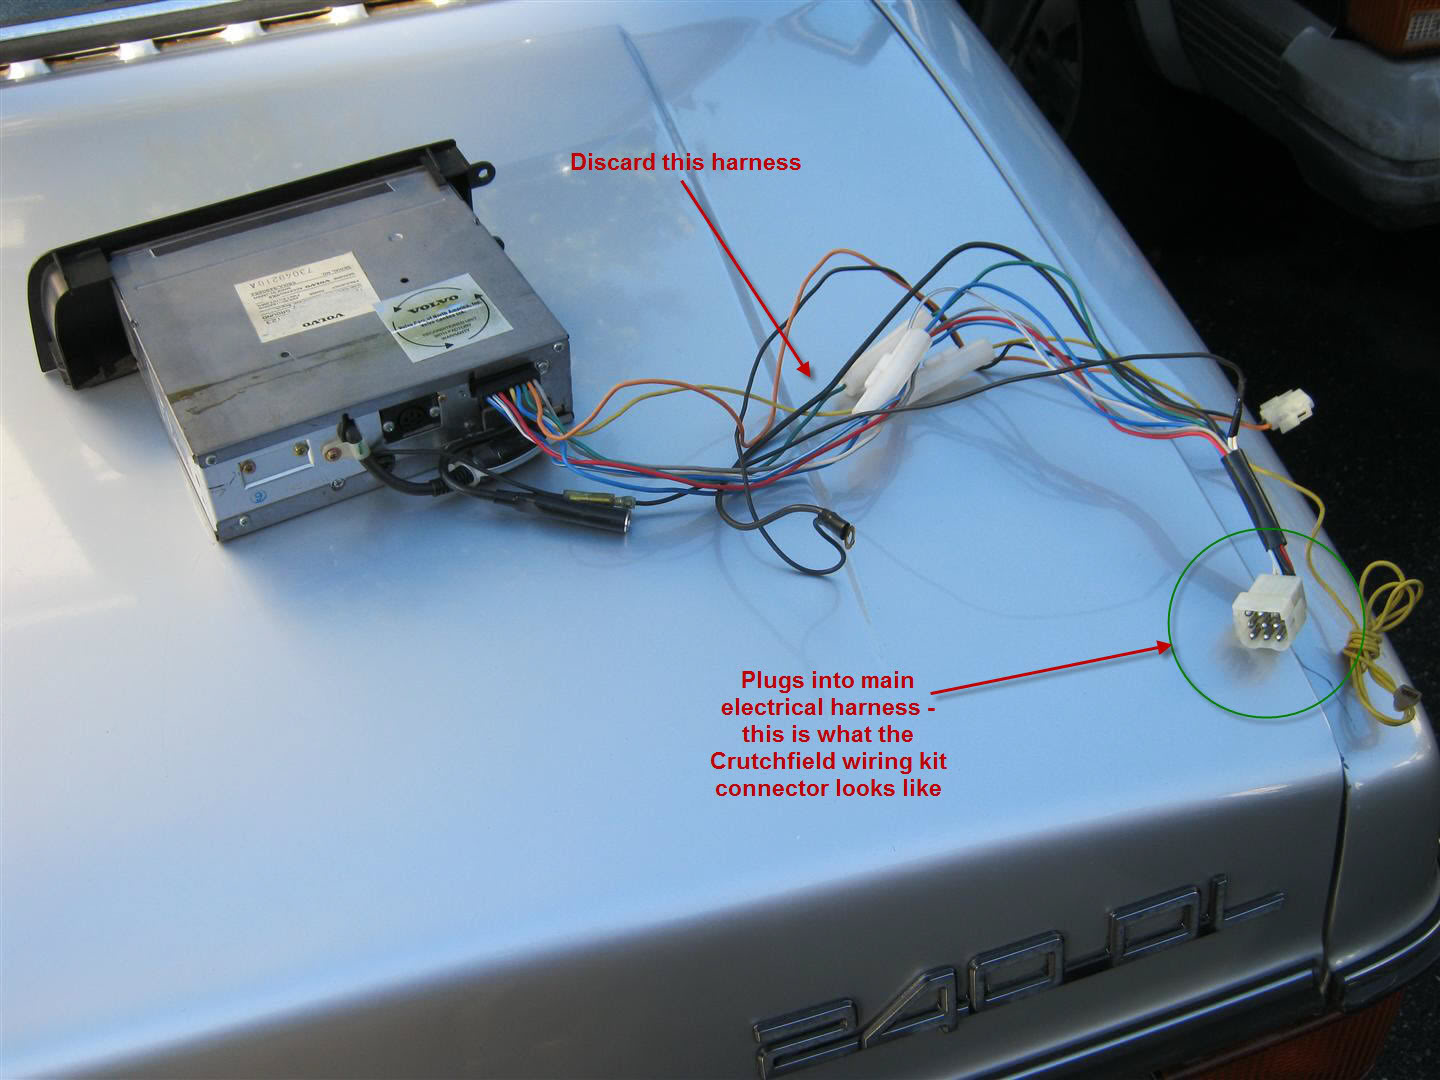 How to replace radio in 1988 volvo 240dl - Volvo Forums - Volvo Enthusiasts  Forum